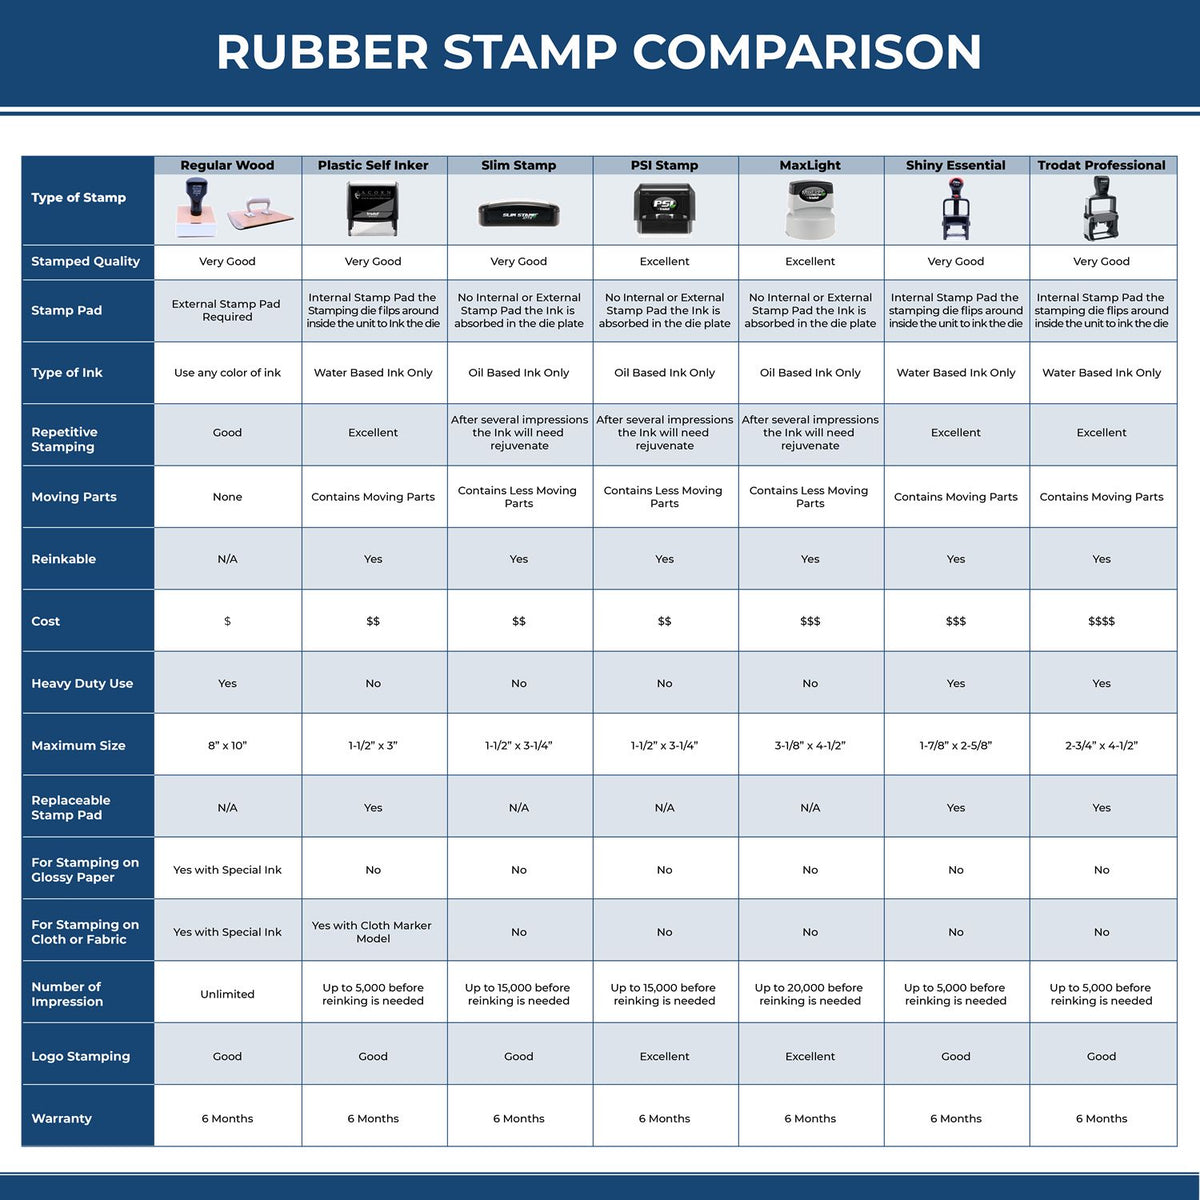 Large Self Inking Blue Cross Stamp 4529S Rubber Stamp Comparison